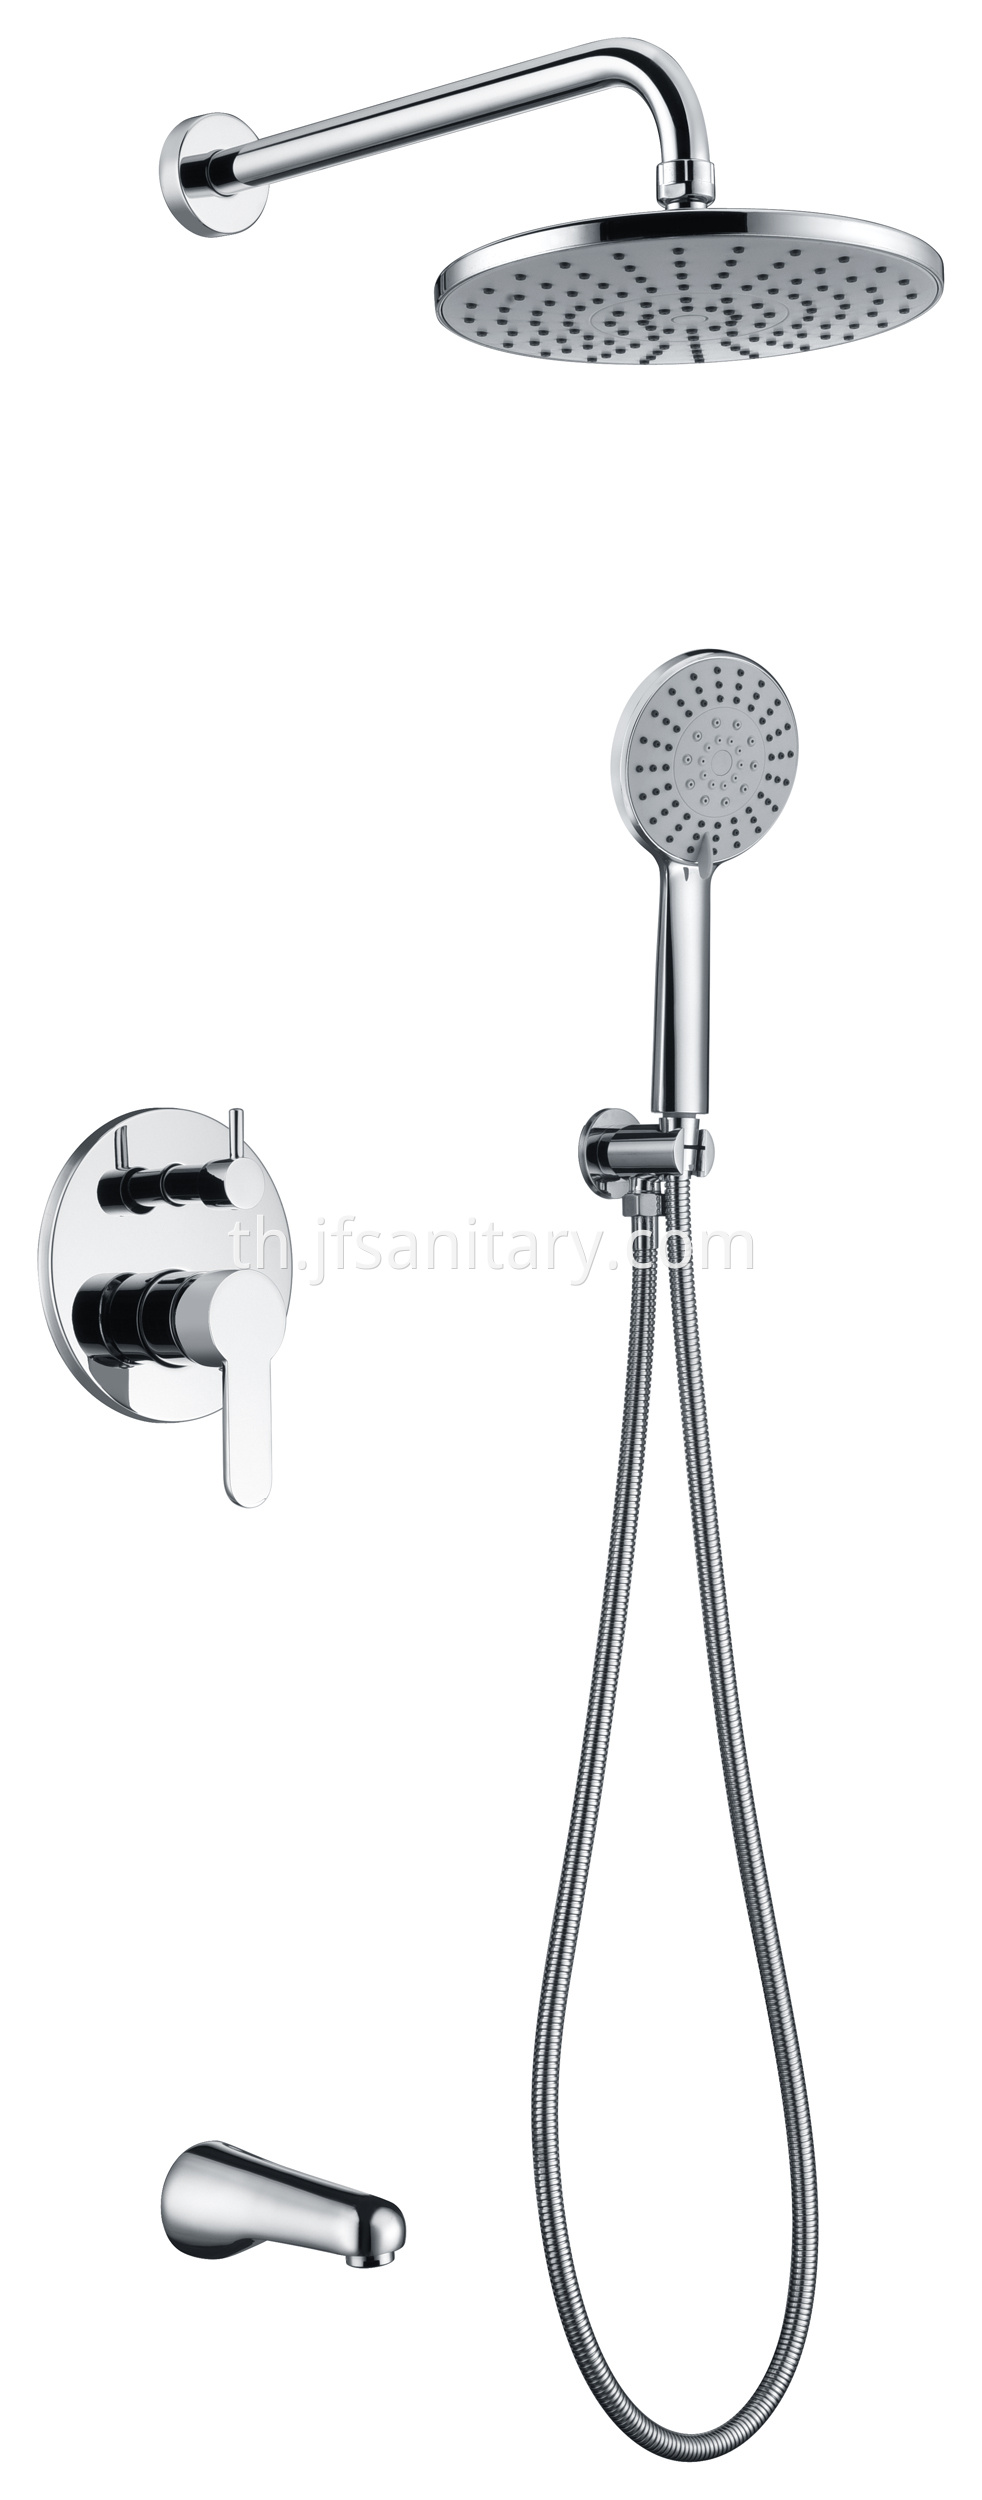 Chrome In Wall Shower Faucet Set